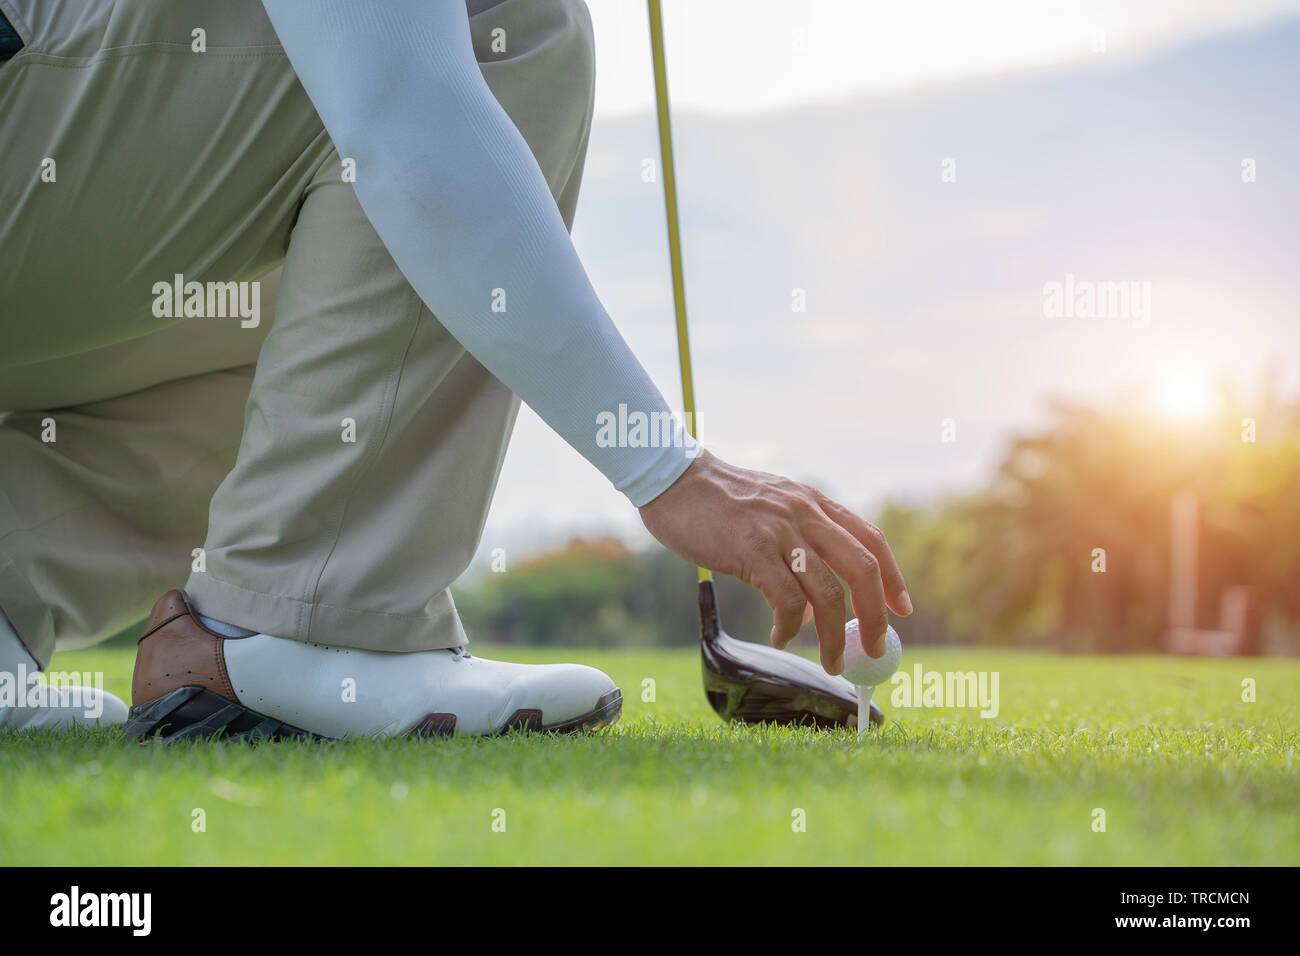 Man hand putting golf ball on tee in golf course - Image Stock Photo